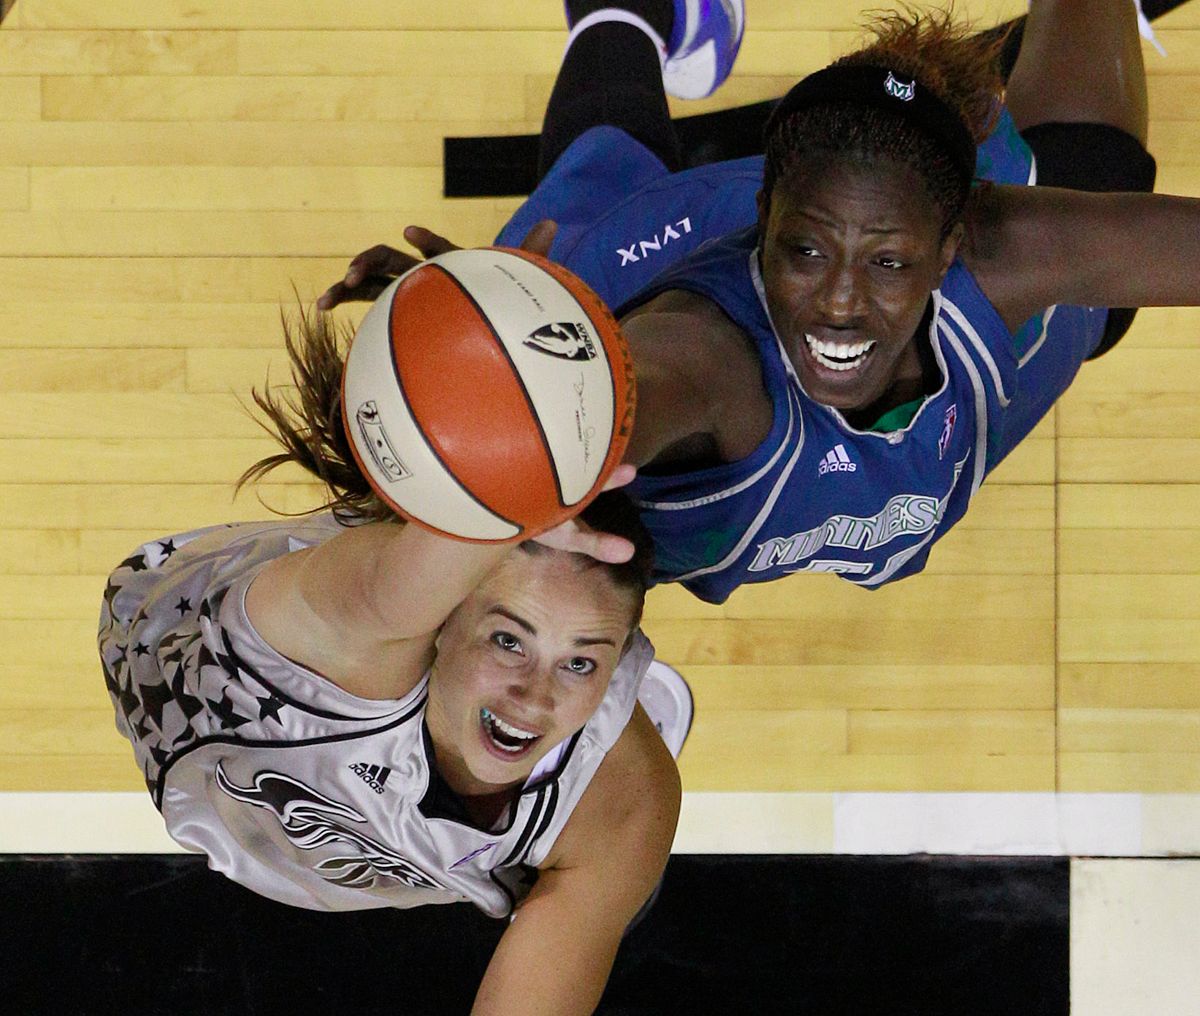 San Antonio Silver Spur's Becky Hammon, left, and Minnesota Lynx's Hamchetou Maiga-Ba, right, compete for a rebound during the fourth quarter of a WNBA basketball game, Saturday, June 26, 2010 in San Antonio. San Antonio won 80-66. (AP Photo/Eric Gay) (Eric Gay)